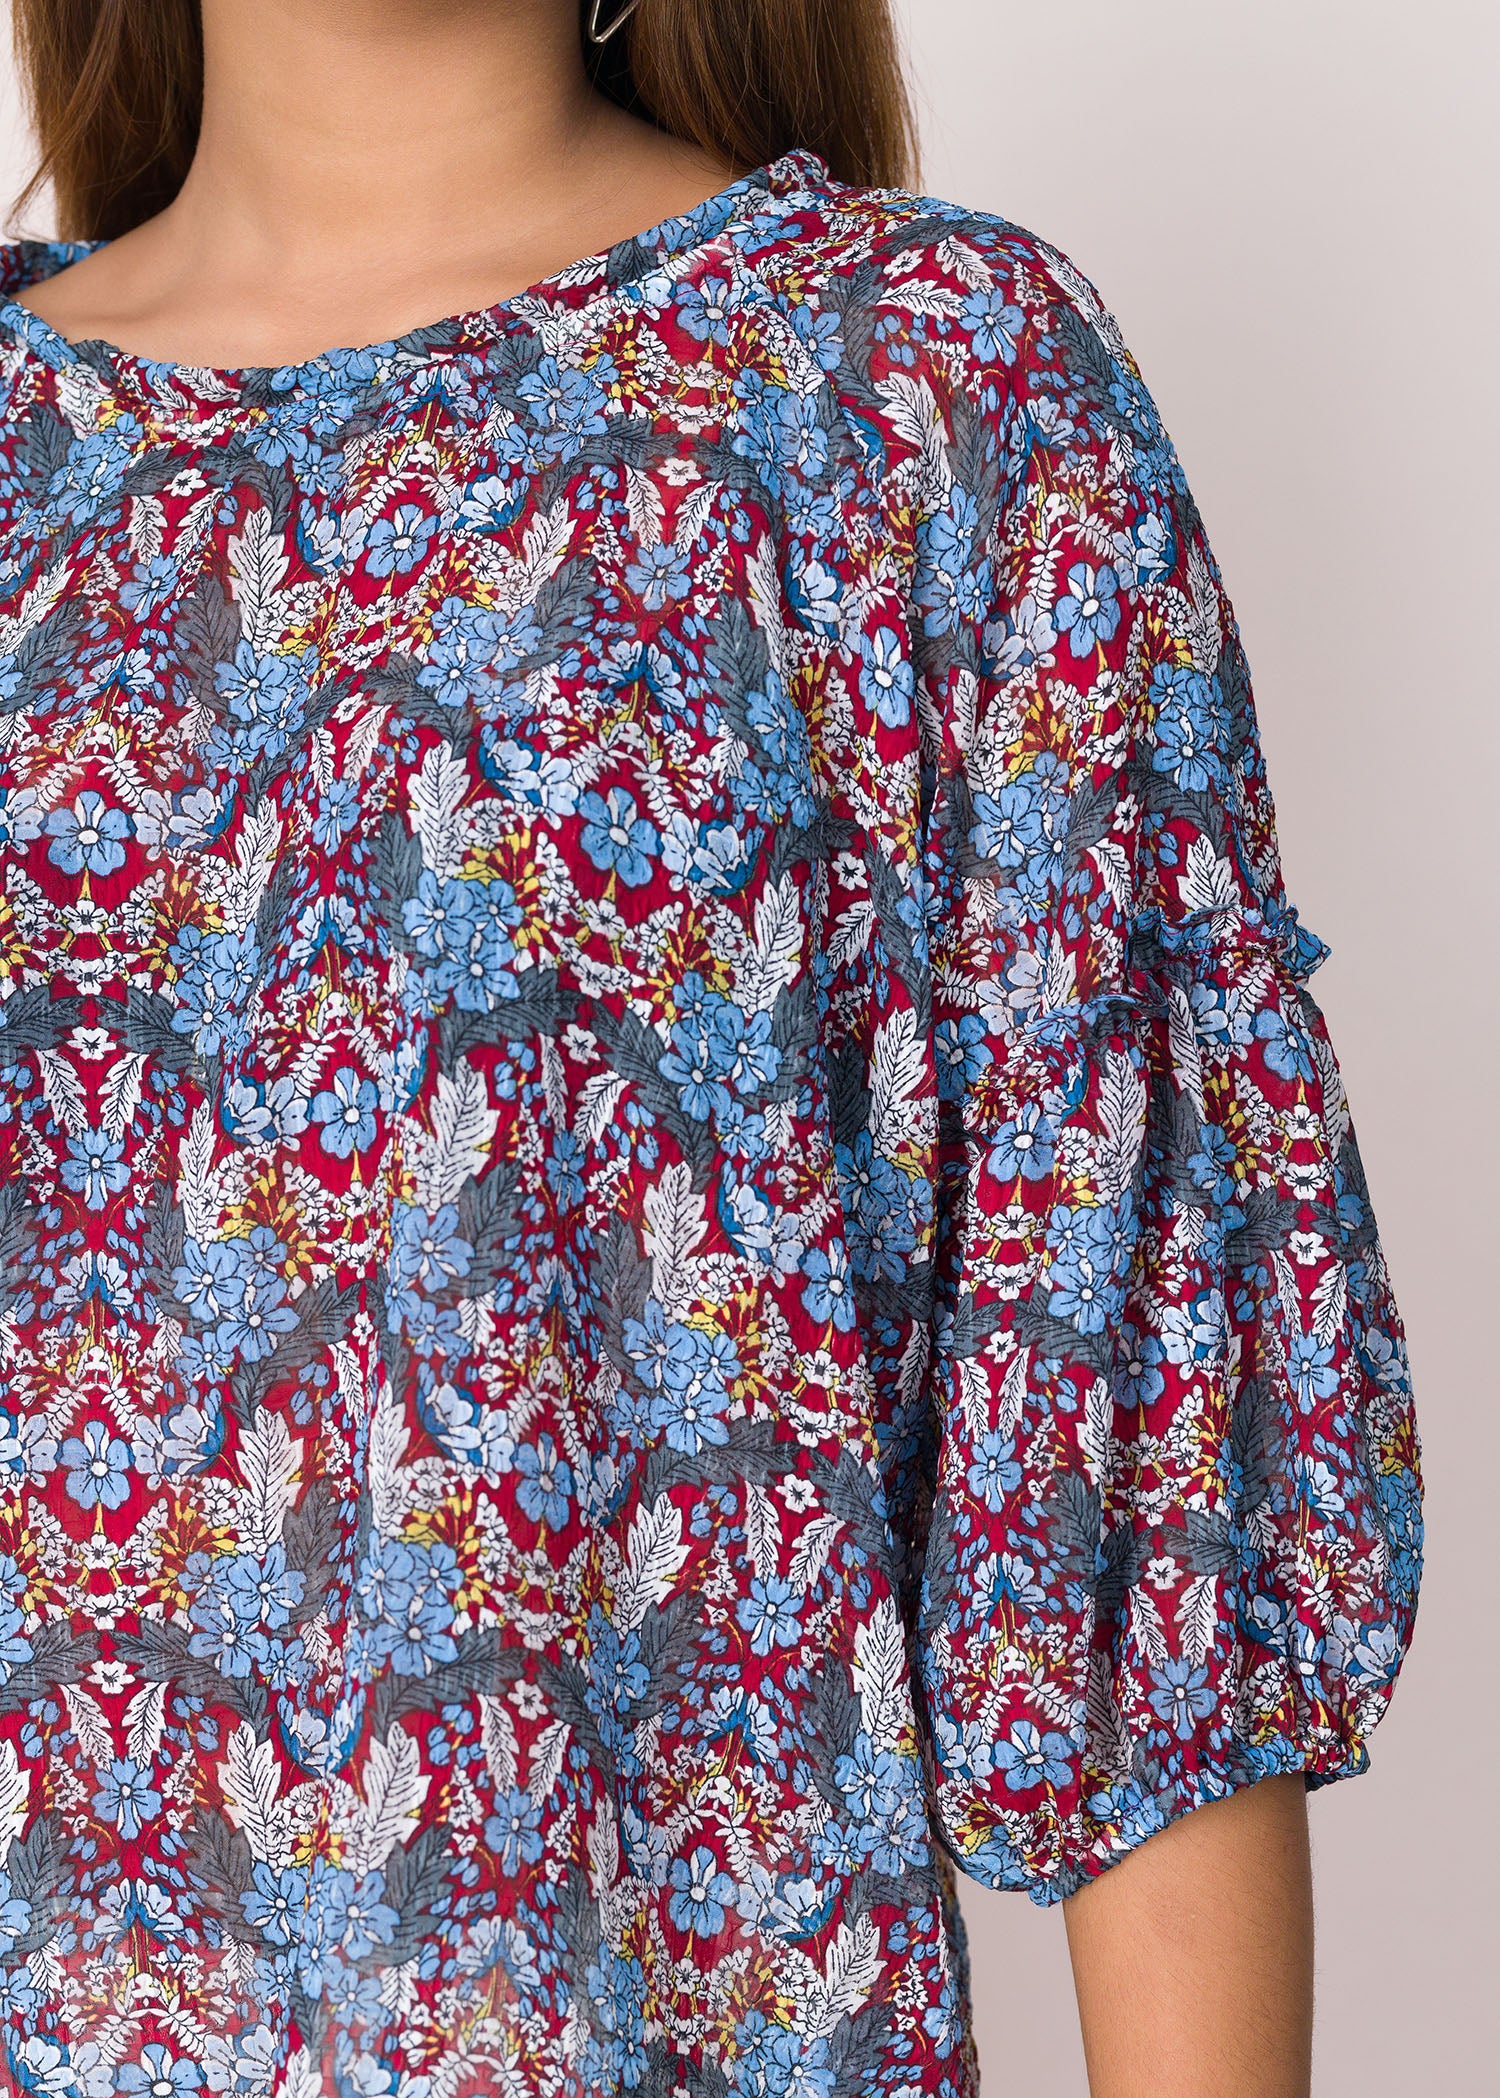 Aesthetic Floral Art Printed Blouse